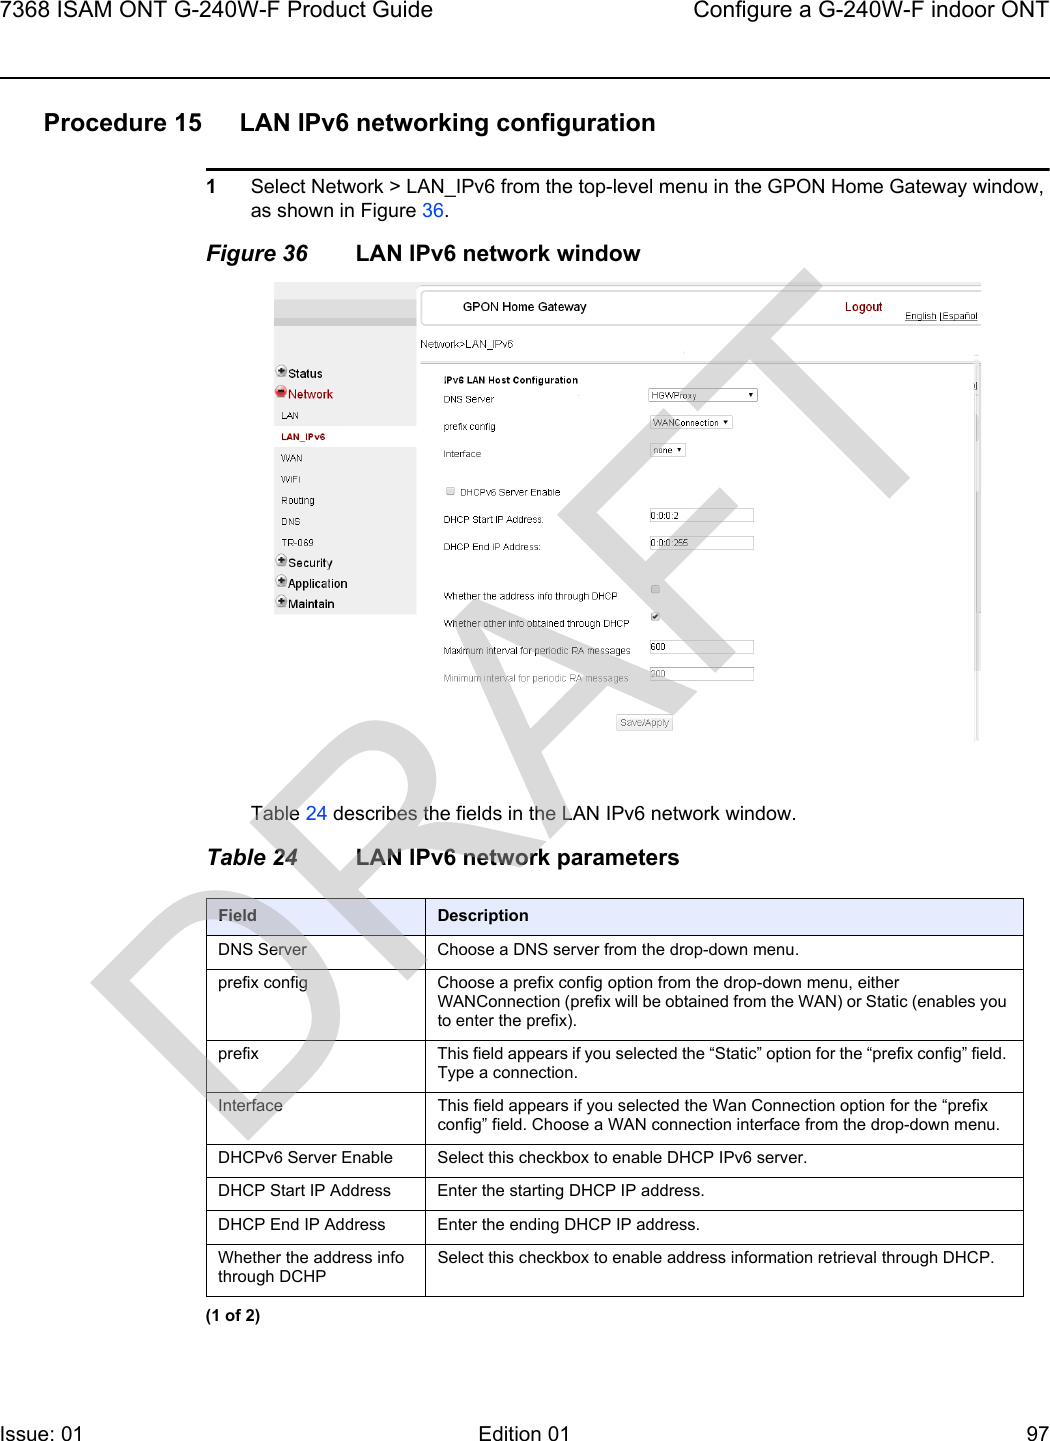 7368 ISAM ONT G-240W-F Product Guide Configure a G-240W-F indoor ONTIssue: 01 Edition 01 97 Procedure 15 LAN IPv6 networking configuration1Select Network &gt; LAN_IPv6 from the top-level menu in the GPON Home Gateway window, as shown in Figure 36.Figure 36 LAN IPv6 network windowTable 24 describes the fields in the LAN IPv6 network window.Table 24 LAN IPv6 network parametersField DescriptionDNS Server Choose a DNS server from the drop-down menu.prefix config Choose a prefix config option from the drop-down menu, either WANConnection (prefix will be obtained from the WAN) or Static (enables you to enter the prefix).prefix This field appears if you selected the “Static” option for the “prefix config” field. Type a connection.Interface This field appears if you selected the Wan Connection option for the “prefix config” field. Choose a WAN connection interface from the drop-down menu.DHCPv6 Server Enable Select this checkbox to enable DHCP IPv6 server.DHCP Start IP Address Enter the starting DHCP IP address.DHCP End IP Address Enter the ending DHCP IP address.Whether the address info through DCHPSelect this checkbox to enable address information retrieval through DHCP.(1 of 2)DRAFT